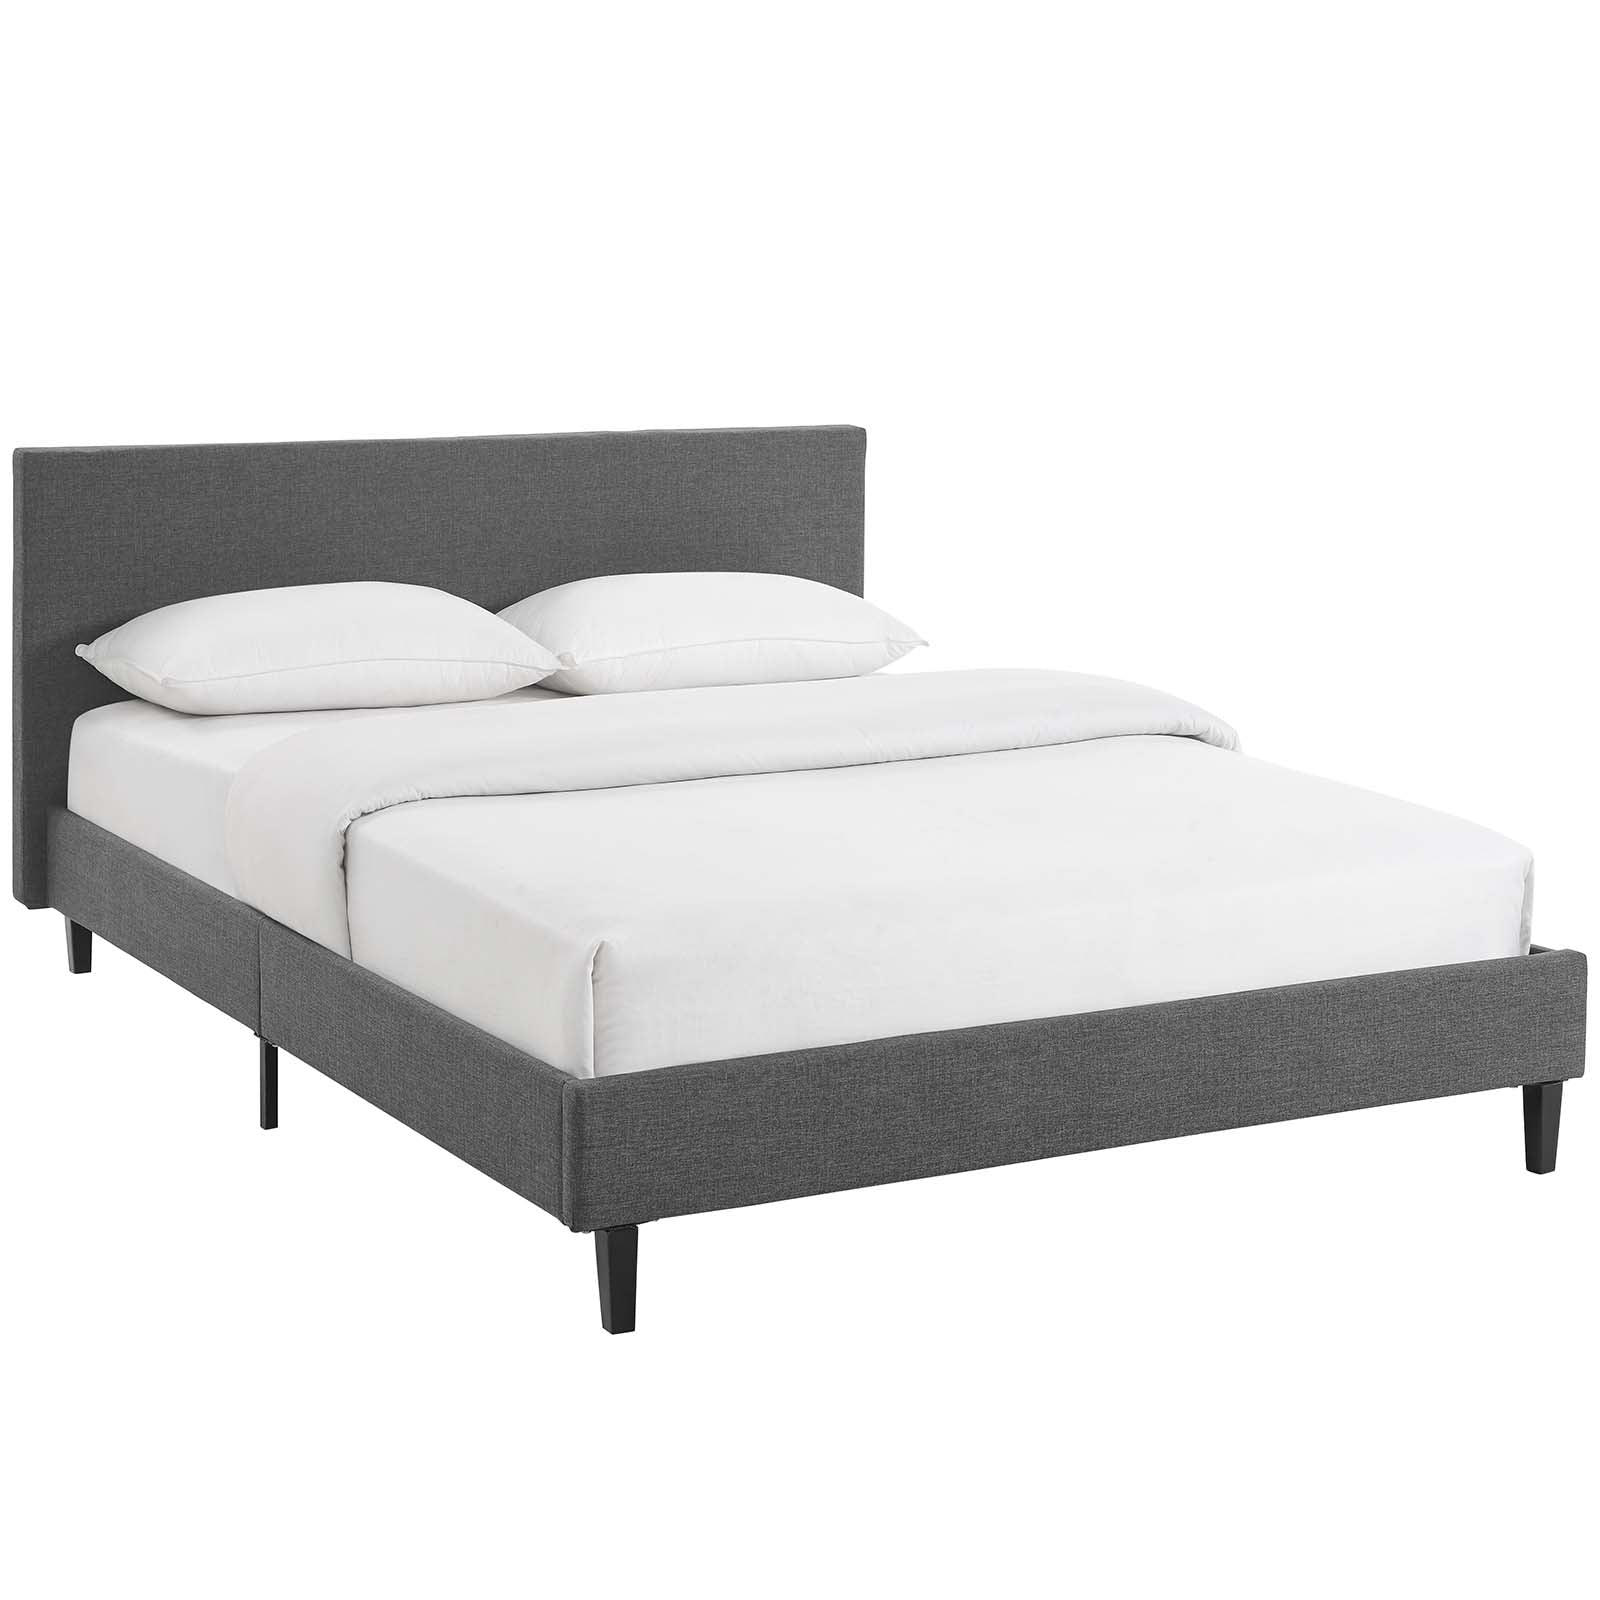 Modway Beds - Anya Queen Bed Gray